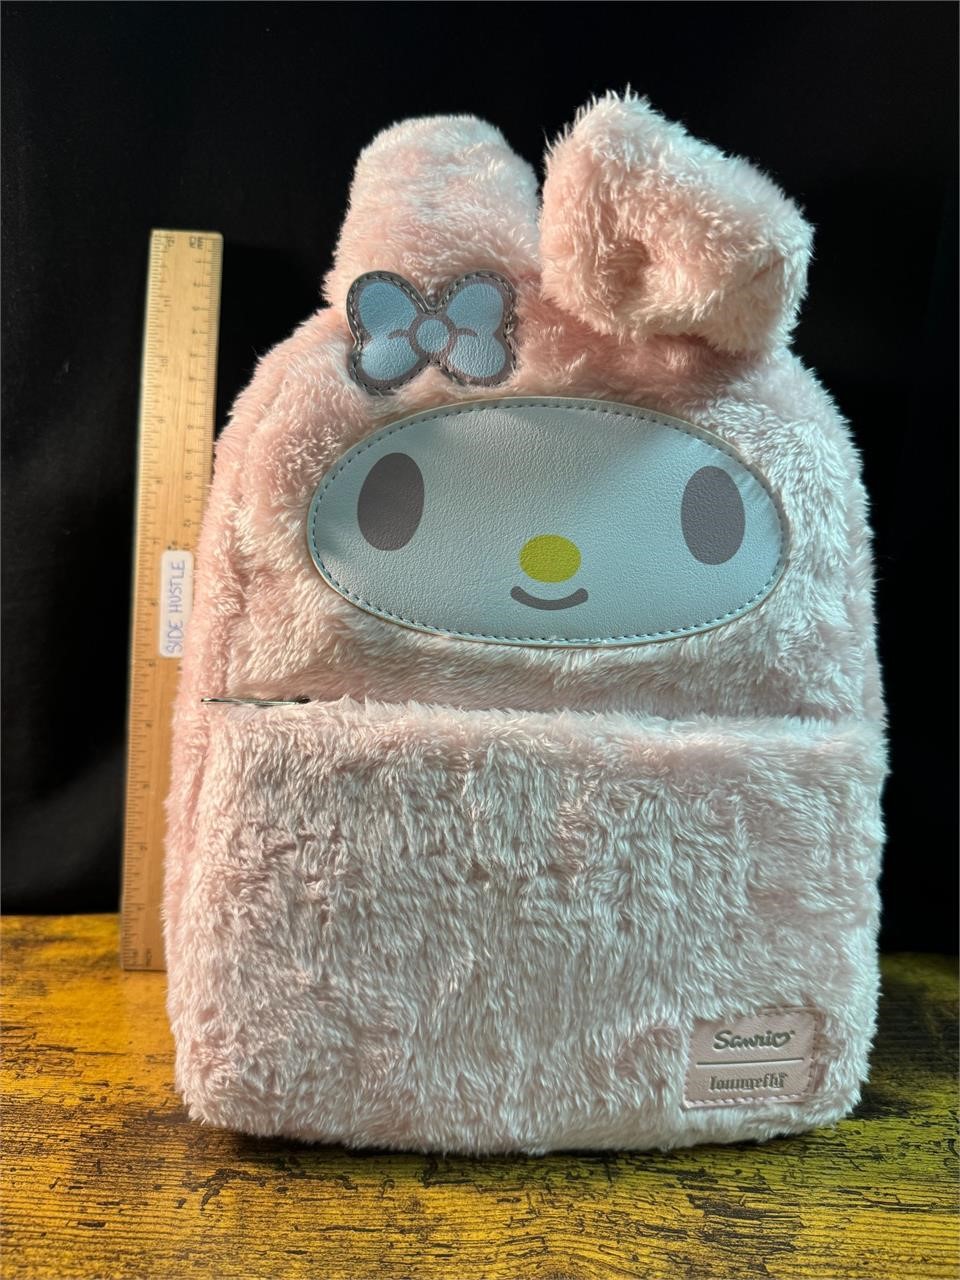 SANRIO LOUNGEFLY MY MELODY MINI BACKPACK